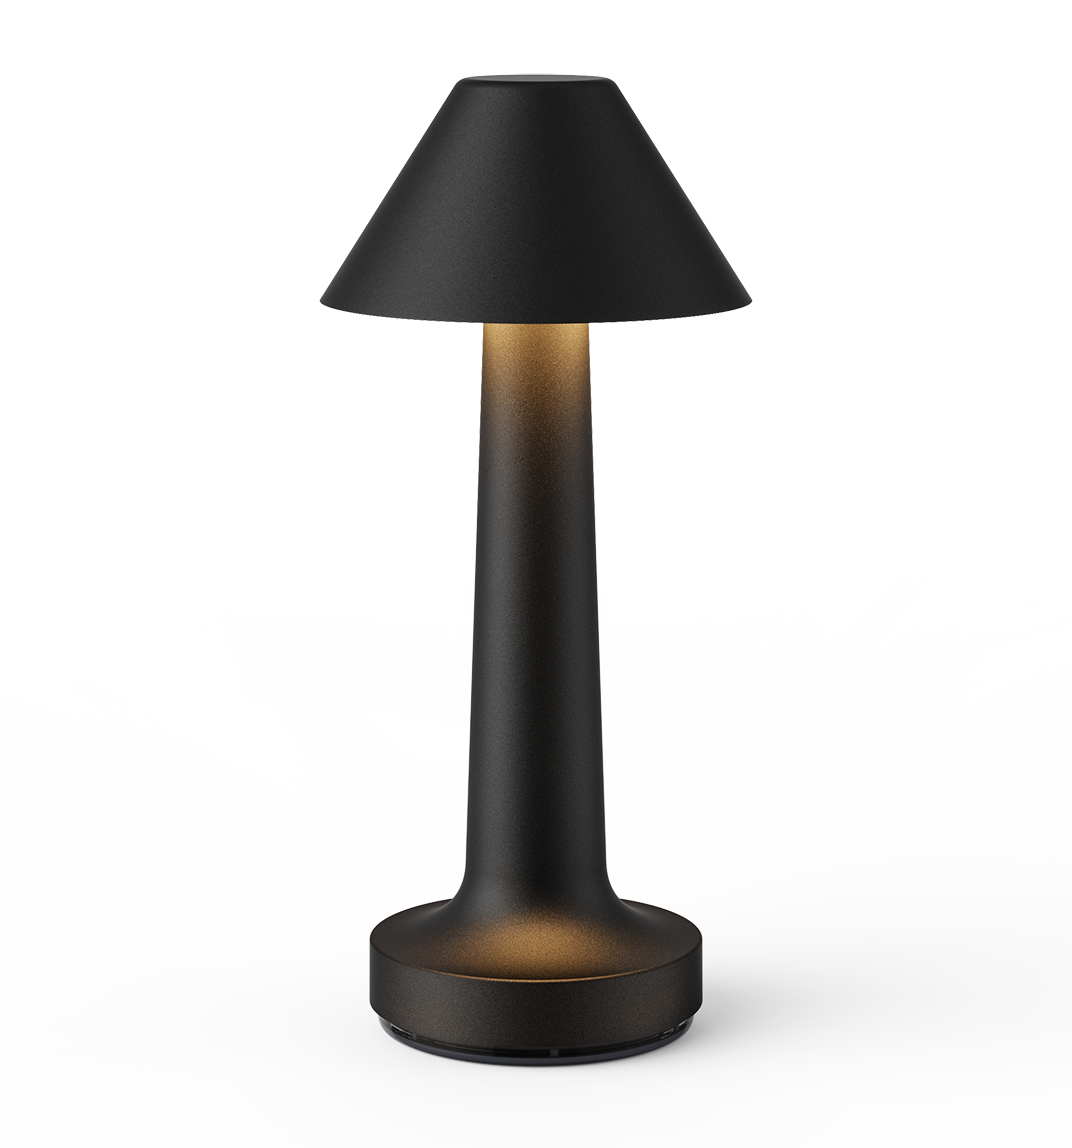 Cooee 3C Cordless Table Lamp by Neoz